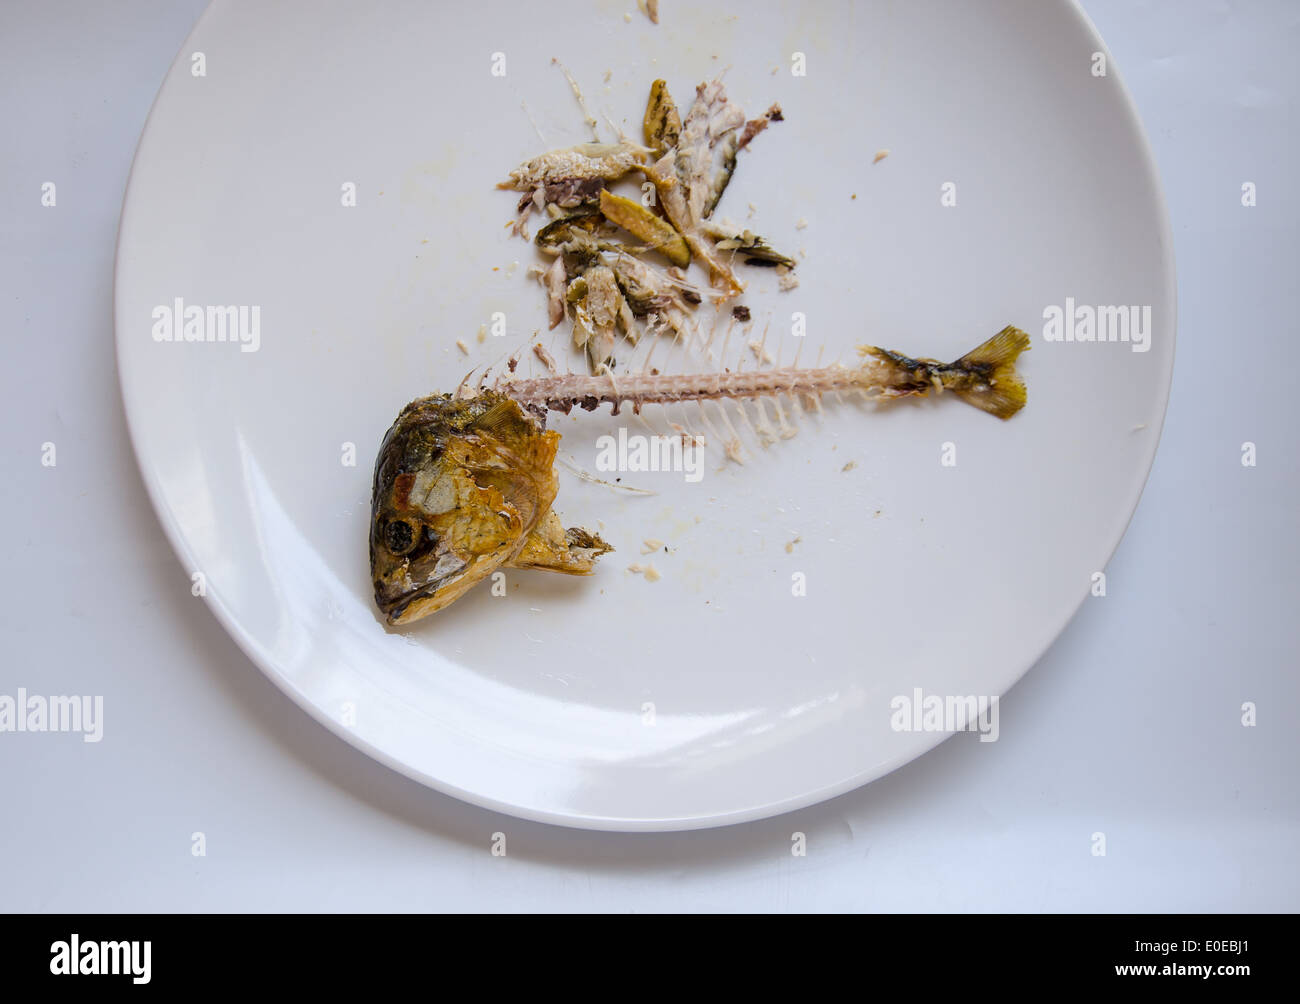 fish bone on dish from eating over Stock Photo